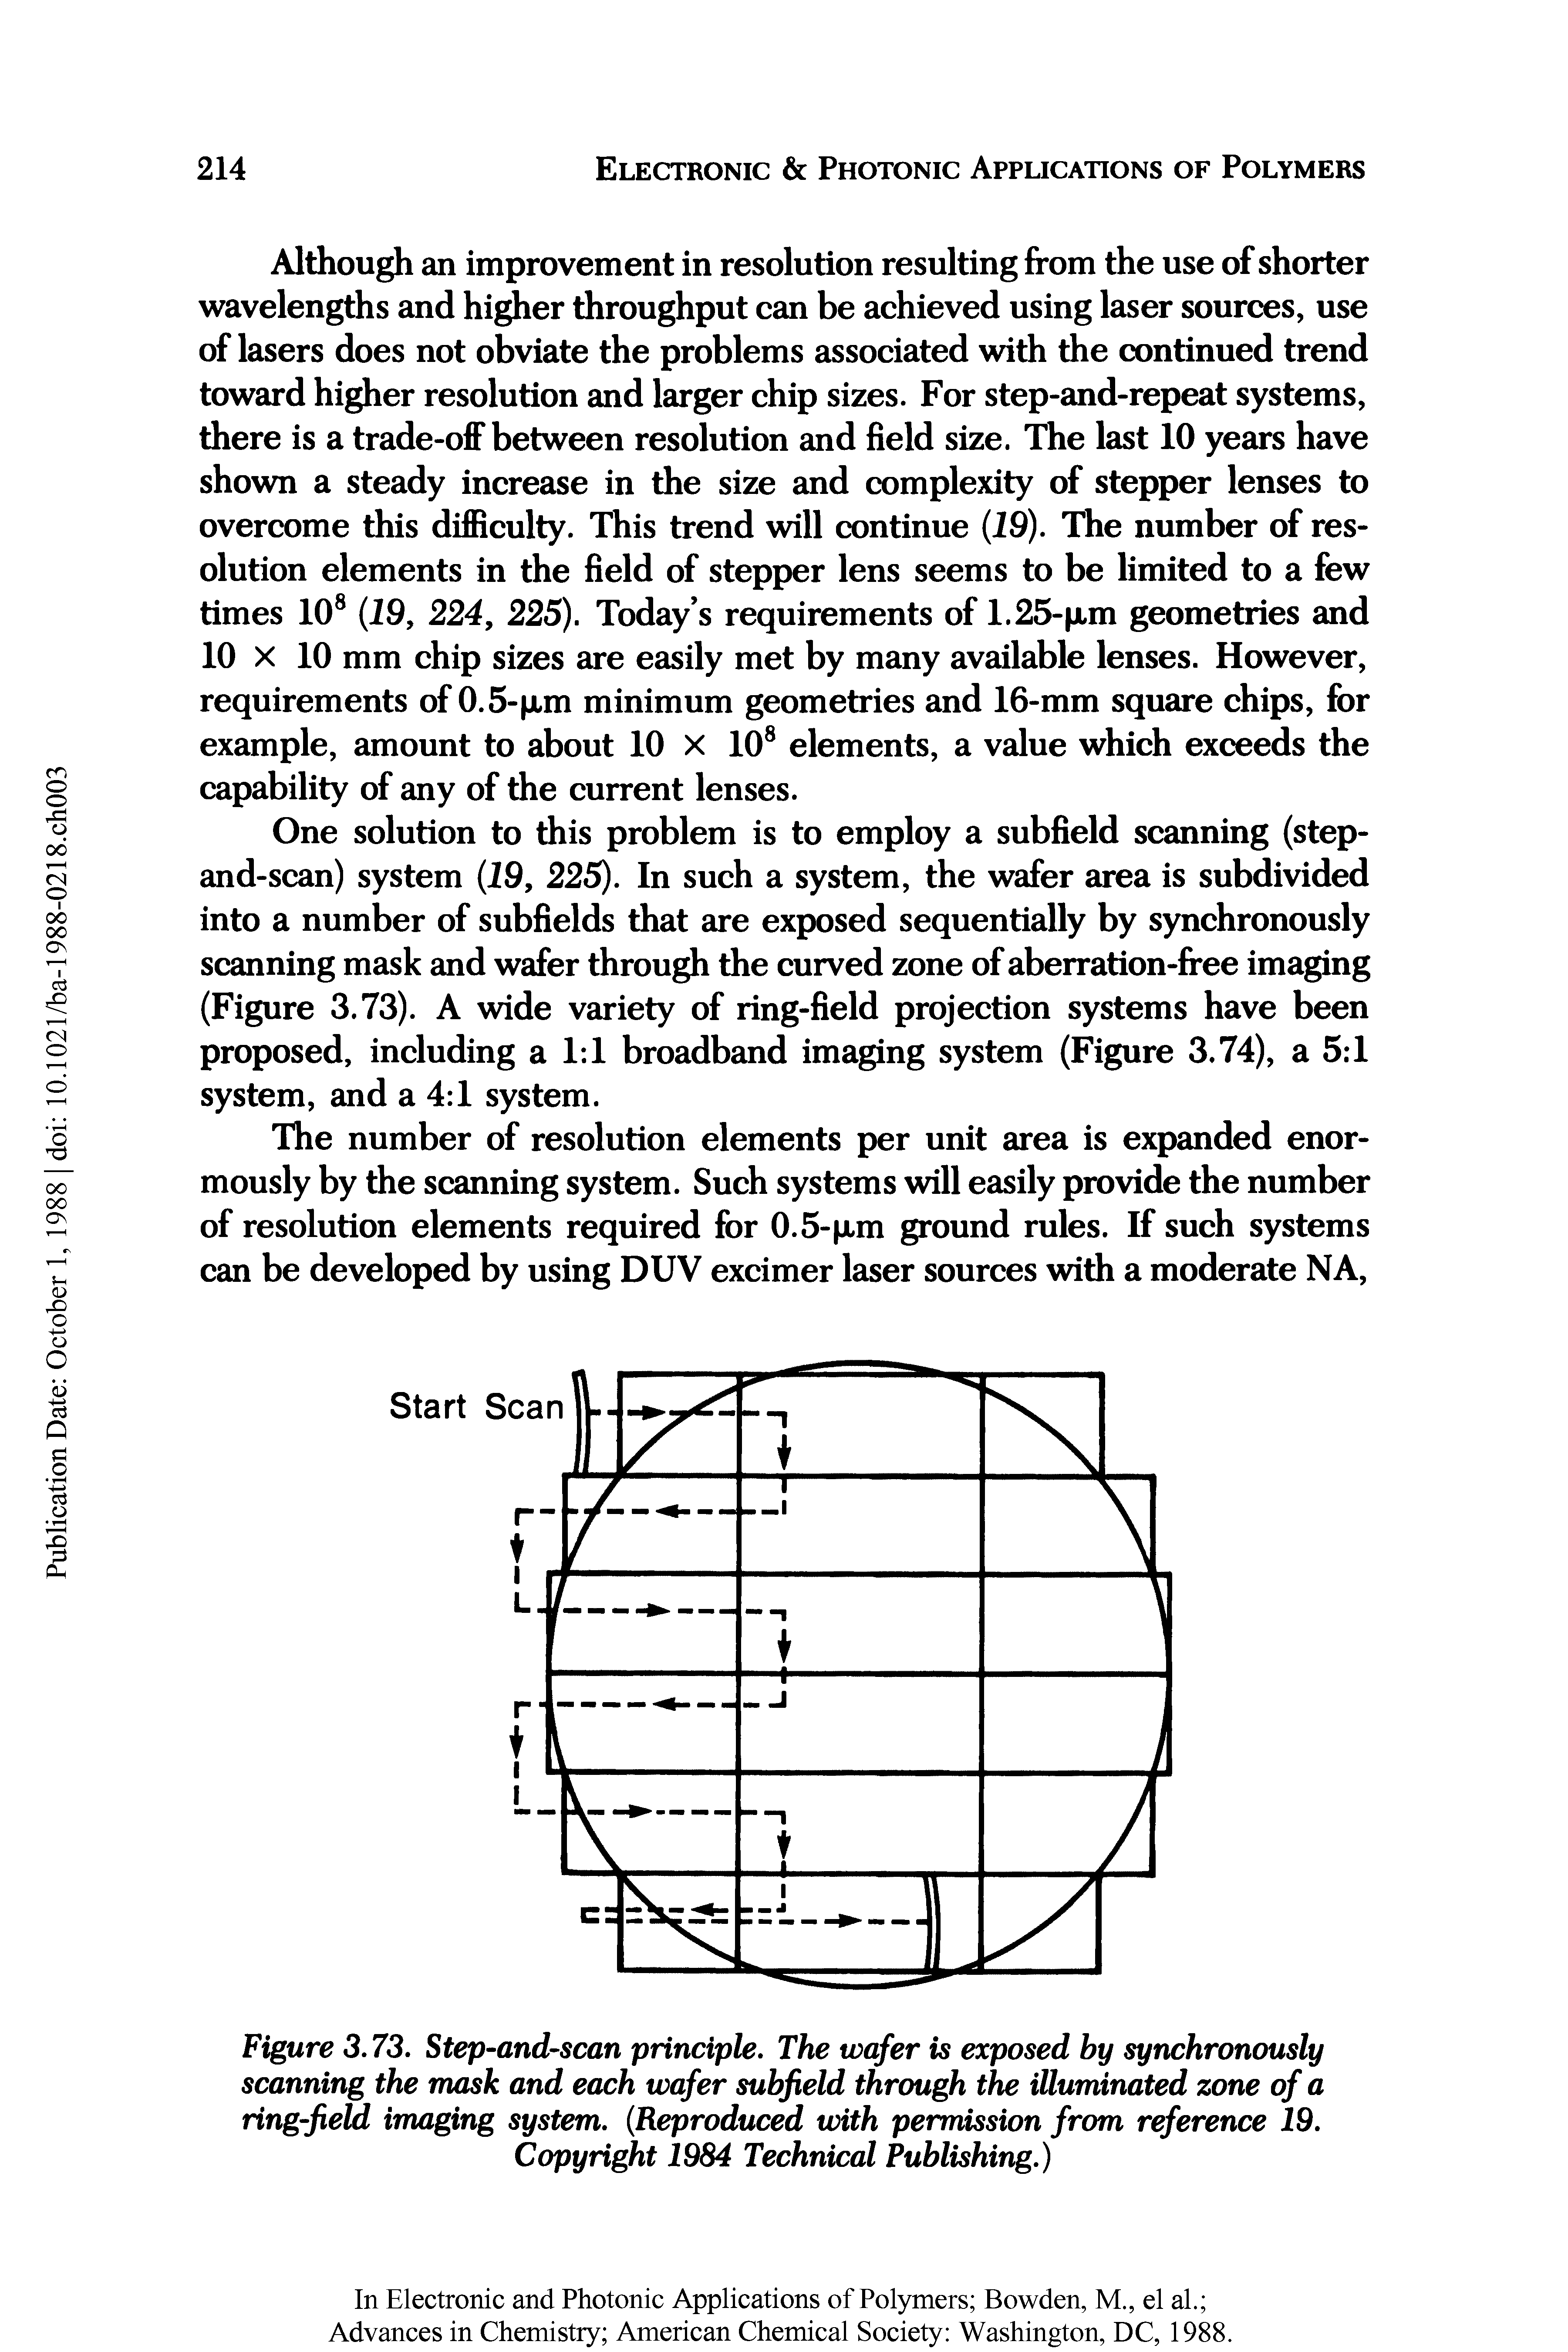 Figure 3.73. Step-and-scan principle. The wafer is exposed by synchronously scanning the mask and each wafer subfield through the illuminated zone of a ring-field imaging system. Reproduced with permission from reference 19. Copyright 1984 Technical Publishing.)...